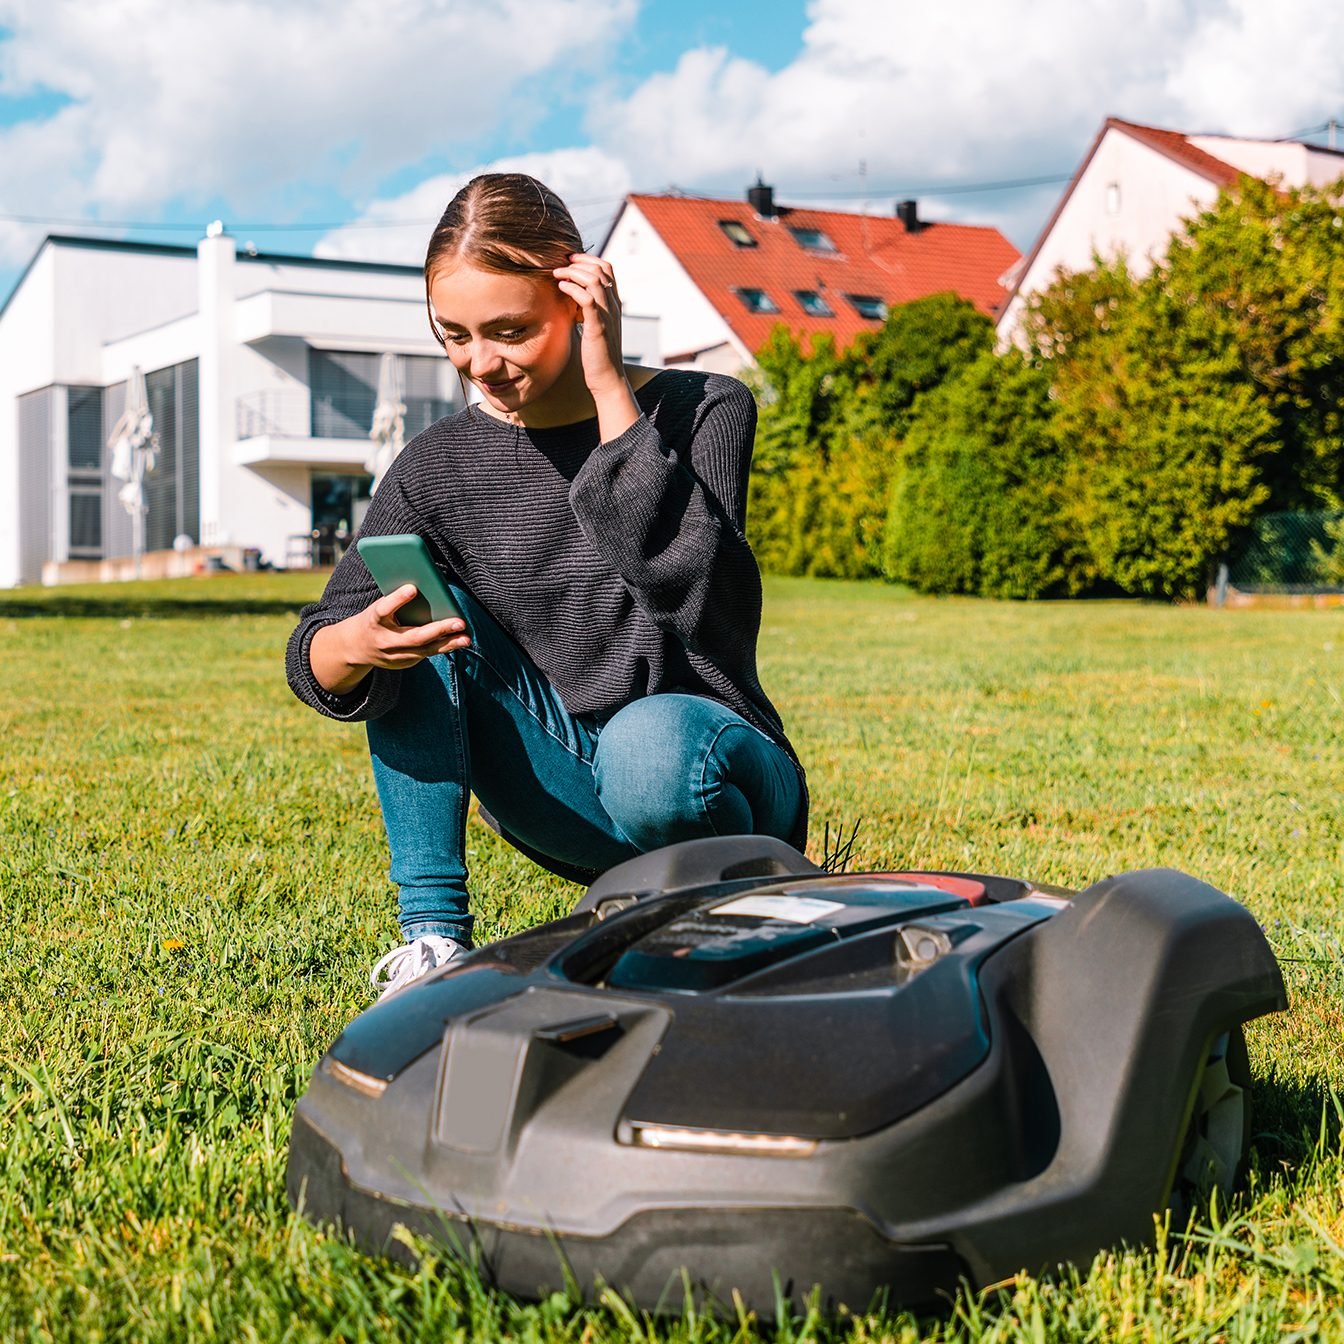 Robotic Lawn Mowers, Battery Powered & Operated